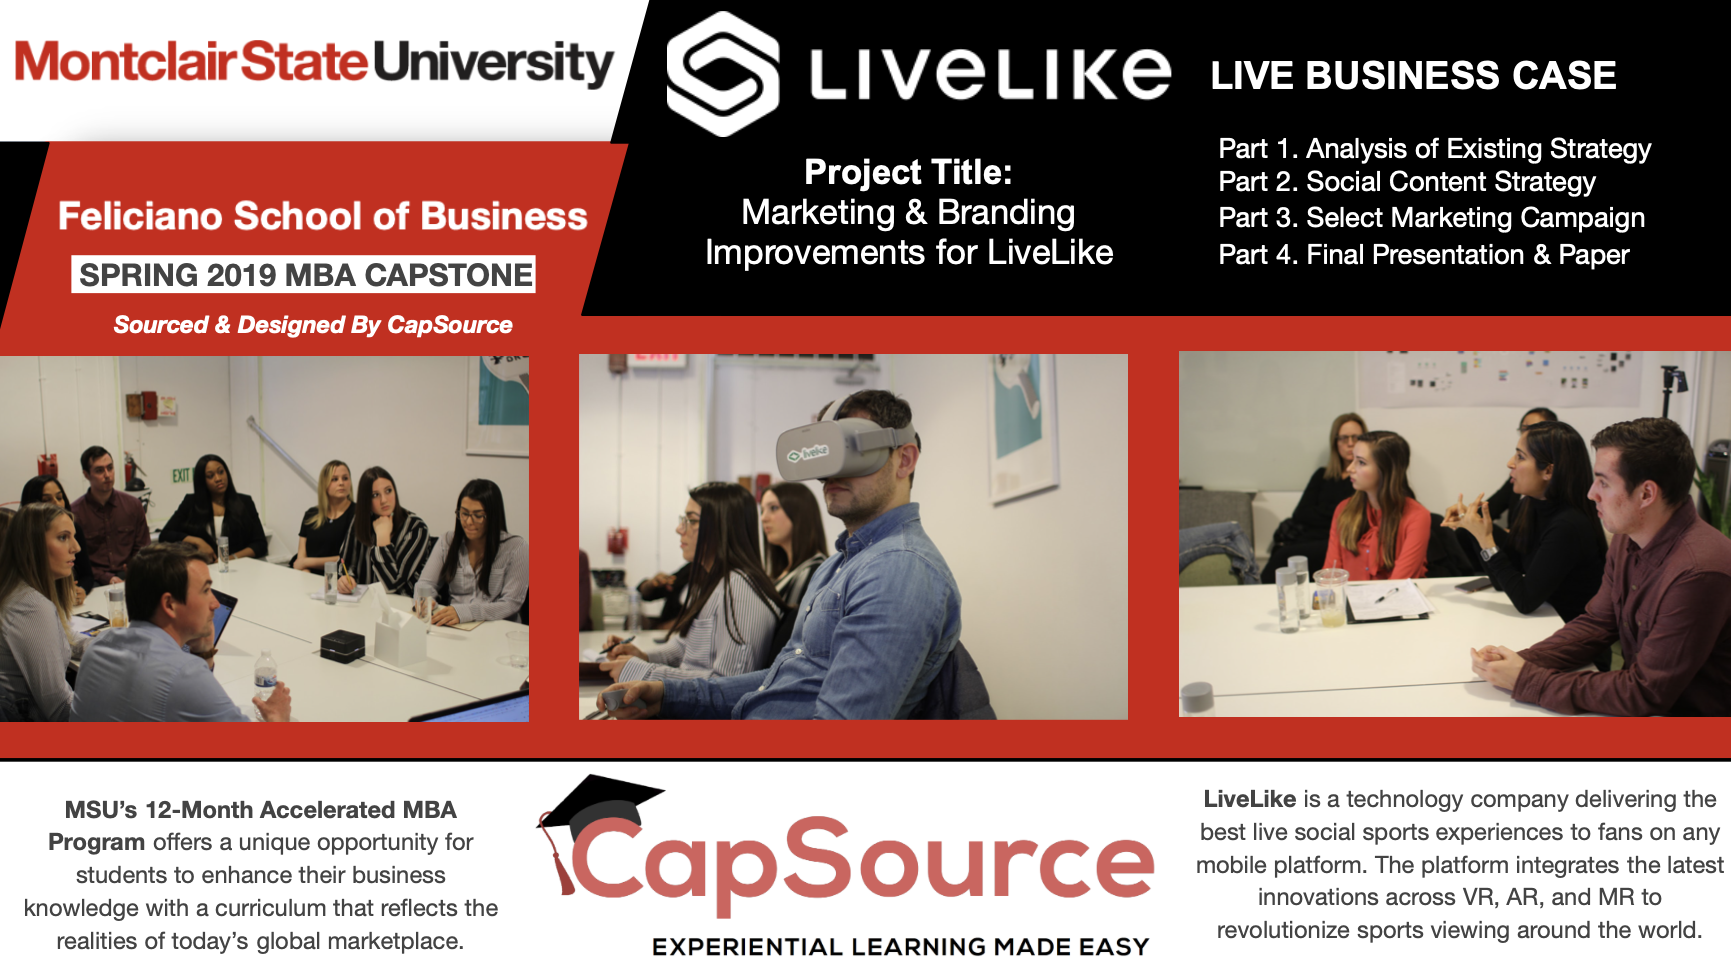 The “Real-World” is the MBA Classroom at Montclair State University thanks to Experiential Learning Partner, CapSource Education